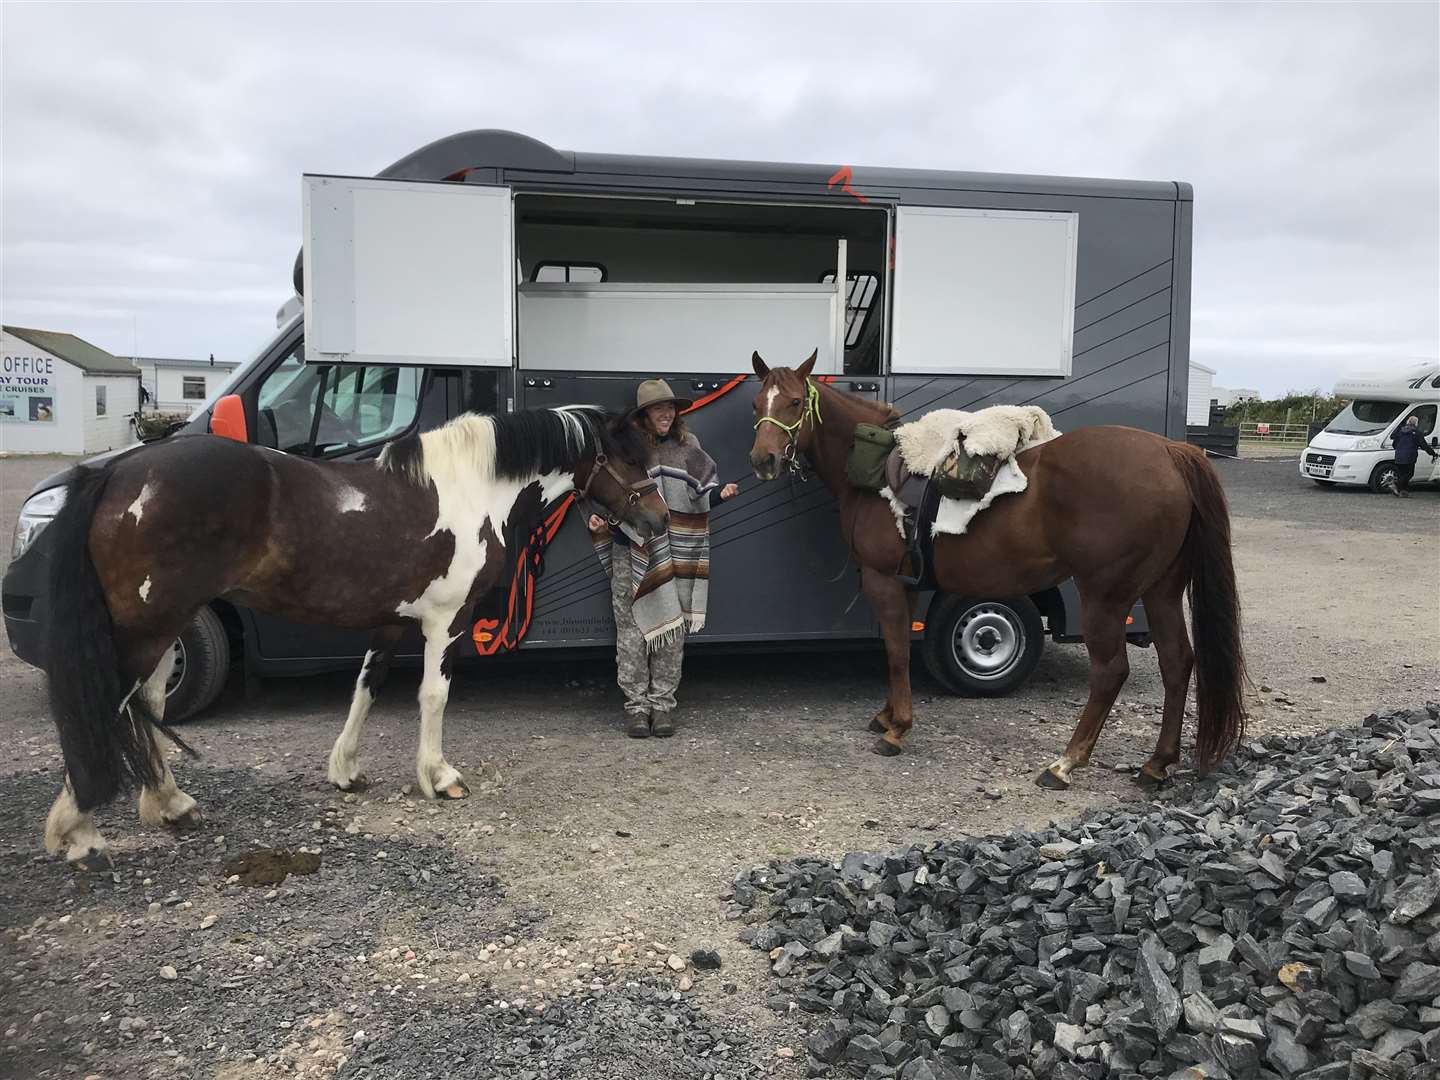 Elsa with her horses Summer (left) and Rosie as she gets ready to set off at John O'Groats. She is wearing a wool Mexican poncho to help keep her warm on her journey.